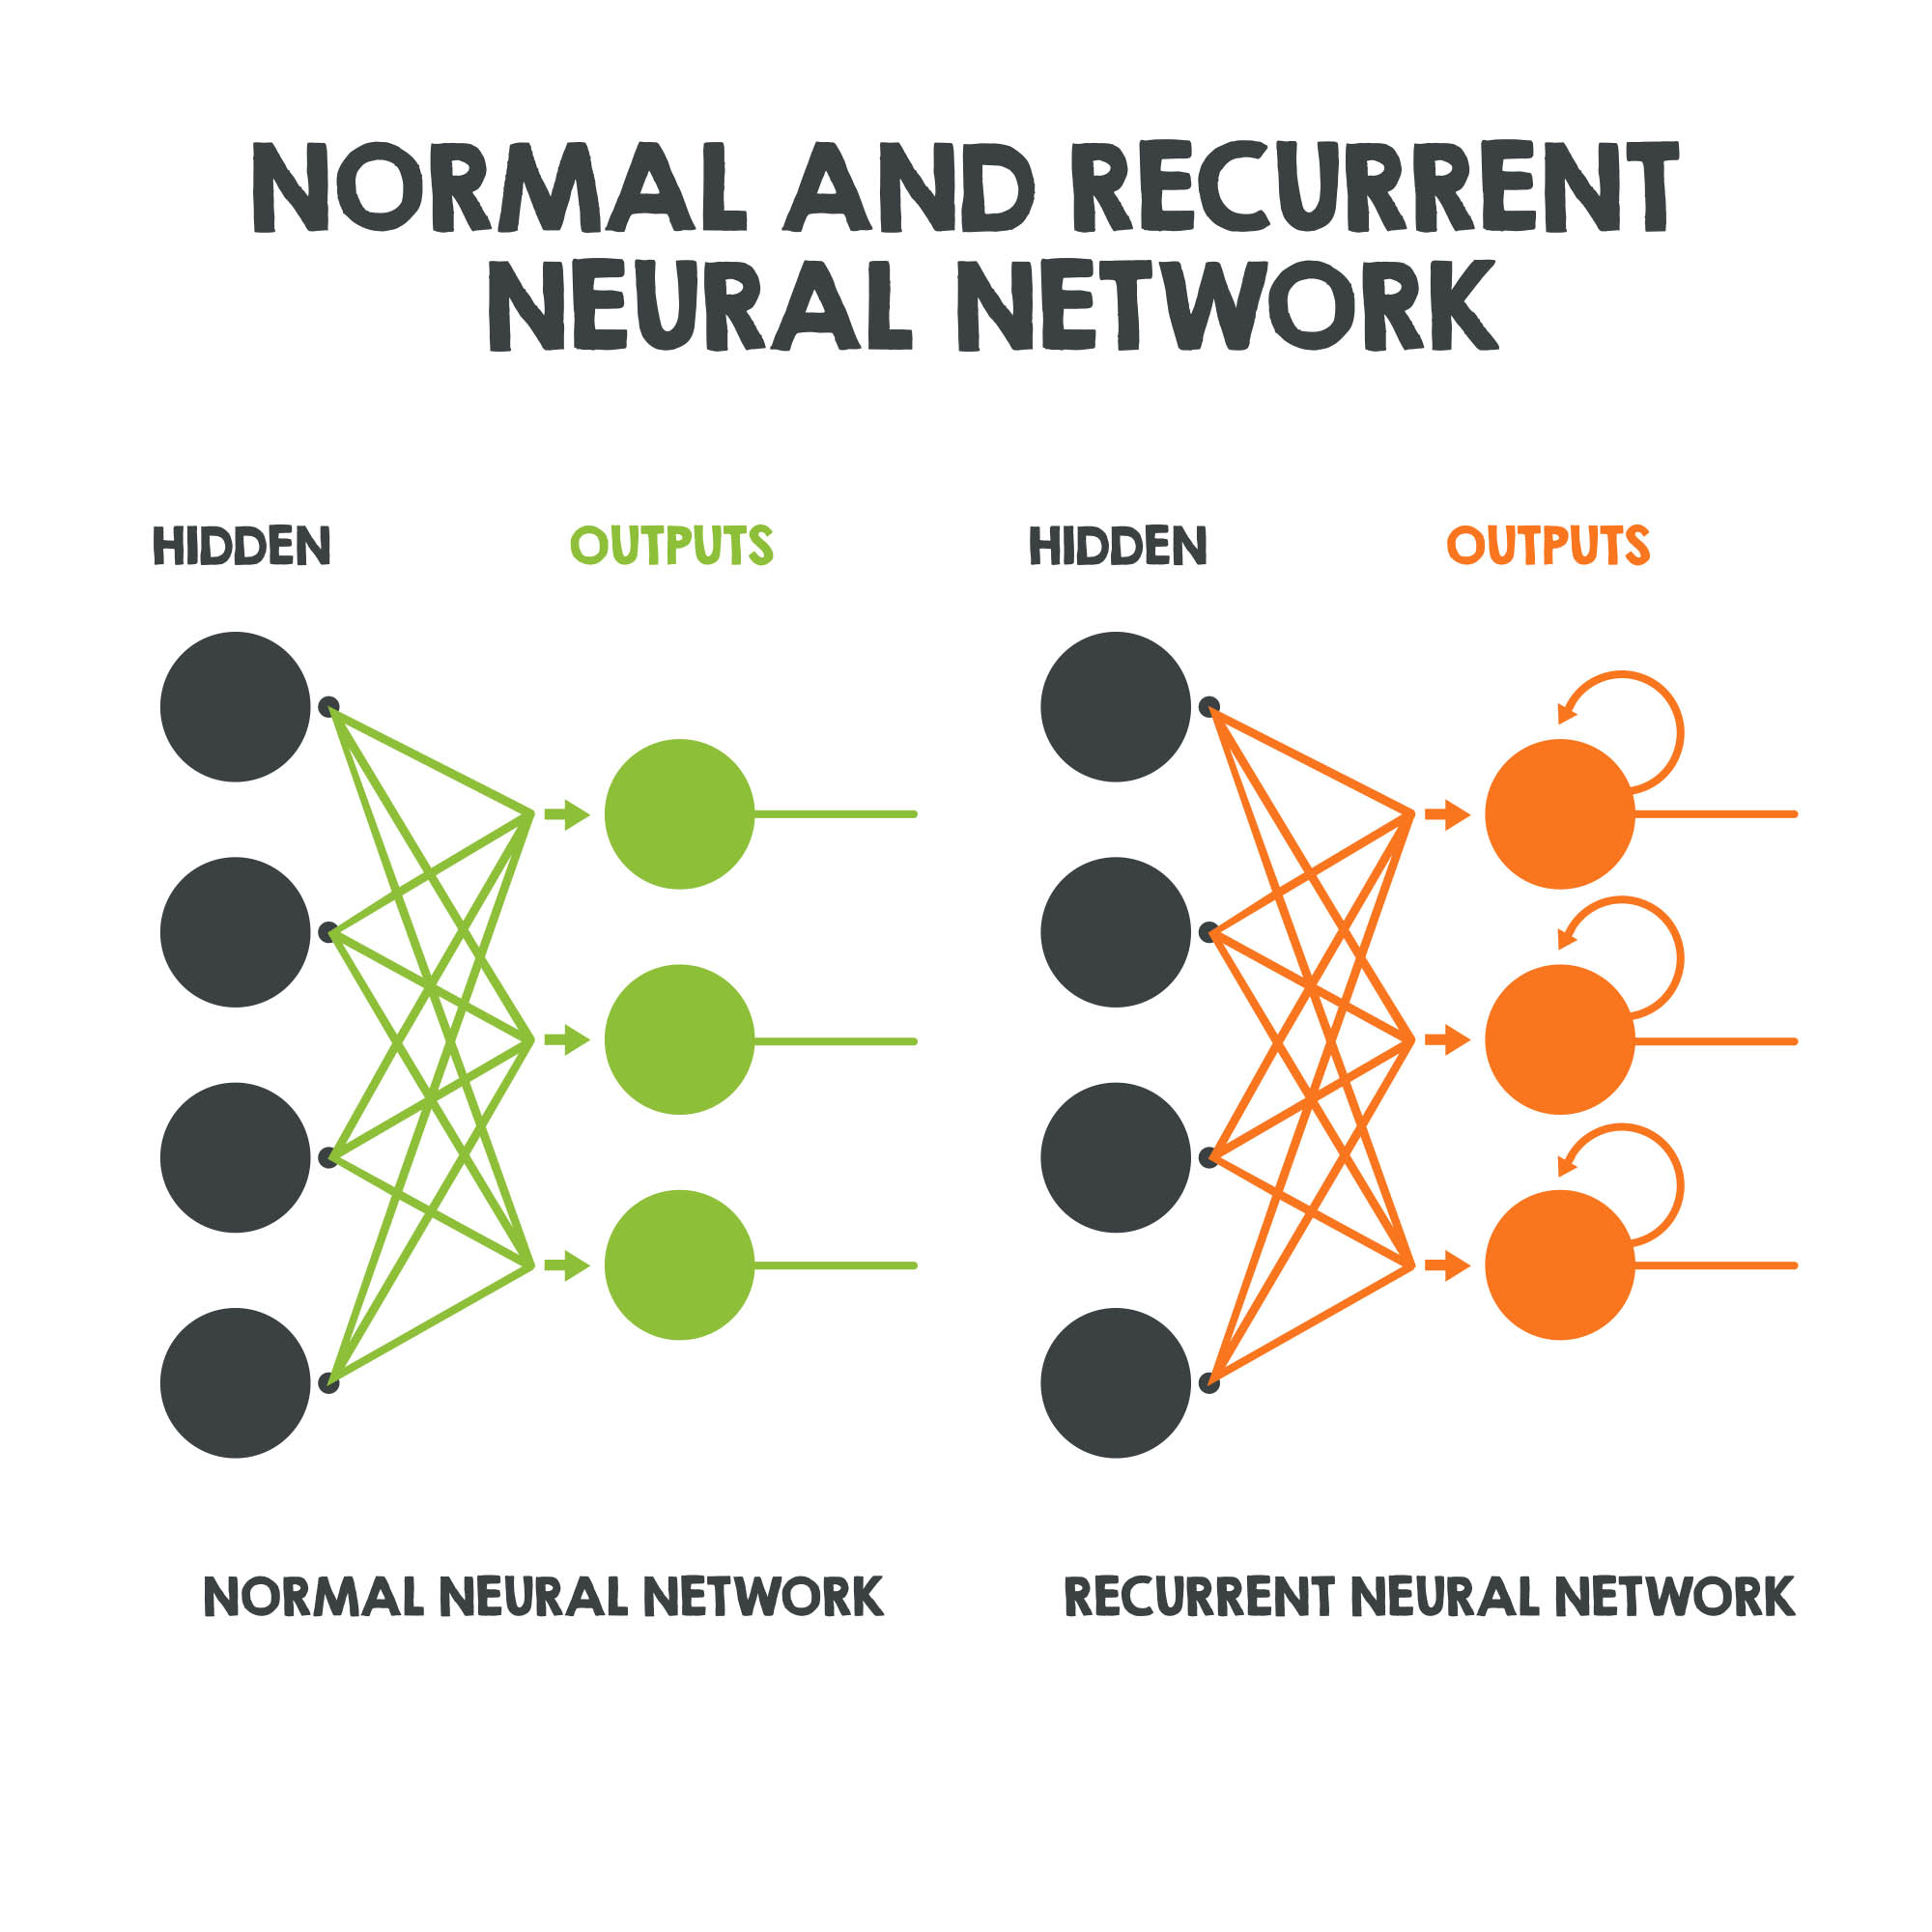 “Recurrent Neural Network” August 2021 — summary from Arxiv and Springer Nature main image